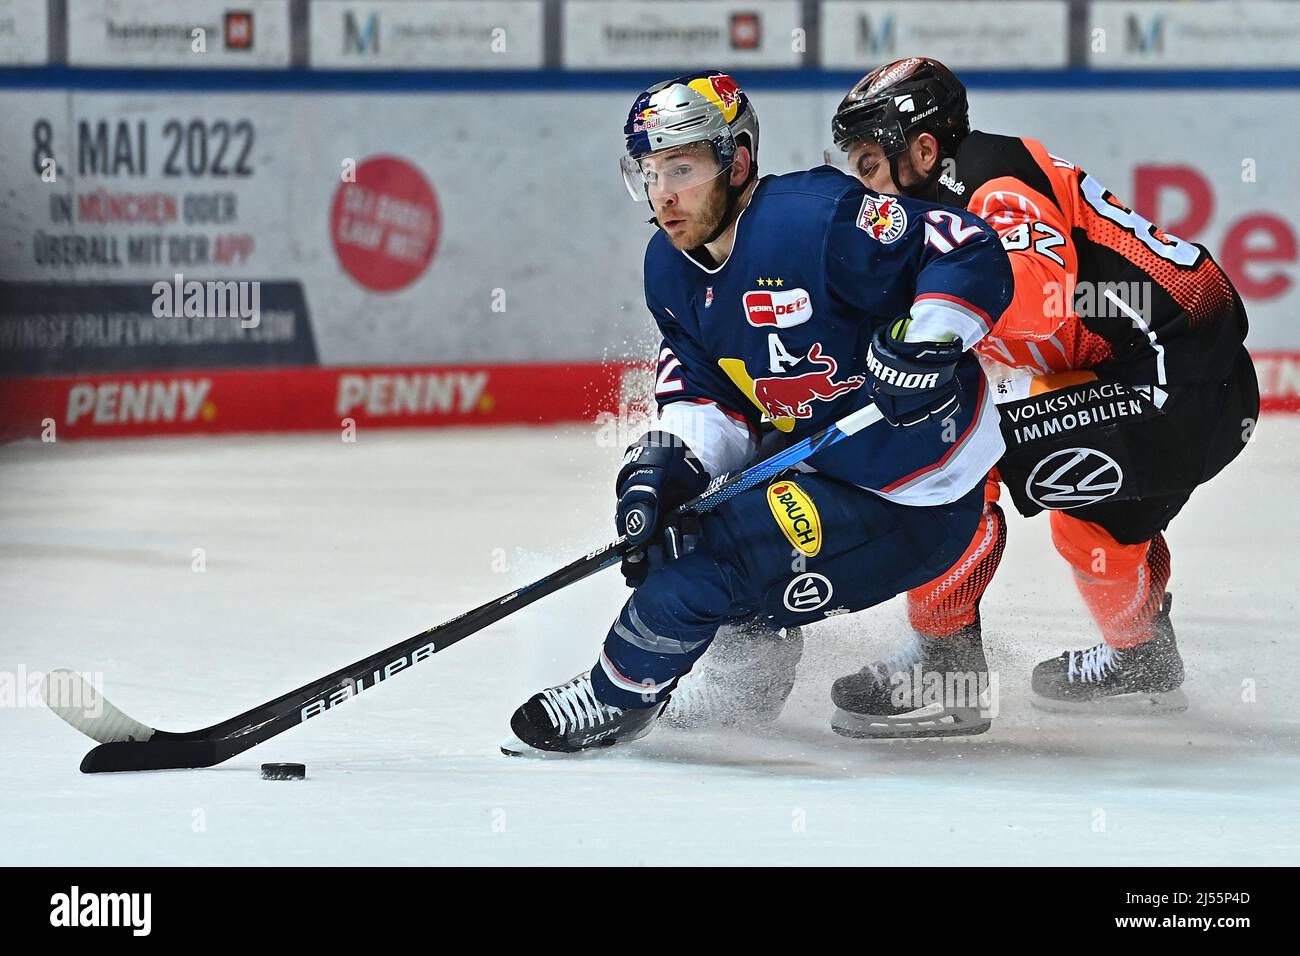 Munich, Germany. 20th Apr, 2022. Ice hockey: DEL, EHC Red Bull Munich - Grizzlies Wolfsburg, championship round, semifinal, 1st game day, Olympia-Eissportzentrum: Munich's Benjamin Smith (l.) fights with Wolfsburg's Christopher DeSousa for the puck. Credit: Lennart Preiss/dpa/Alamy Live News Stock Photo